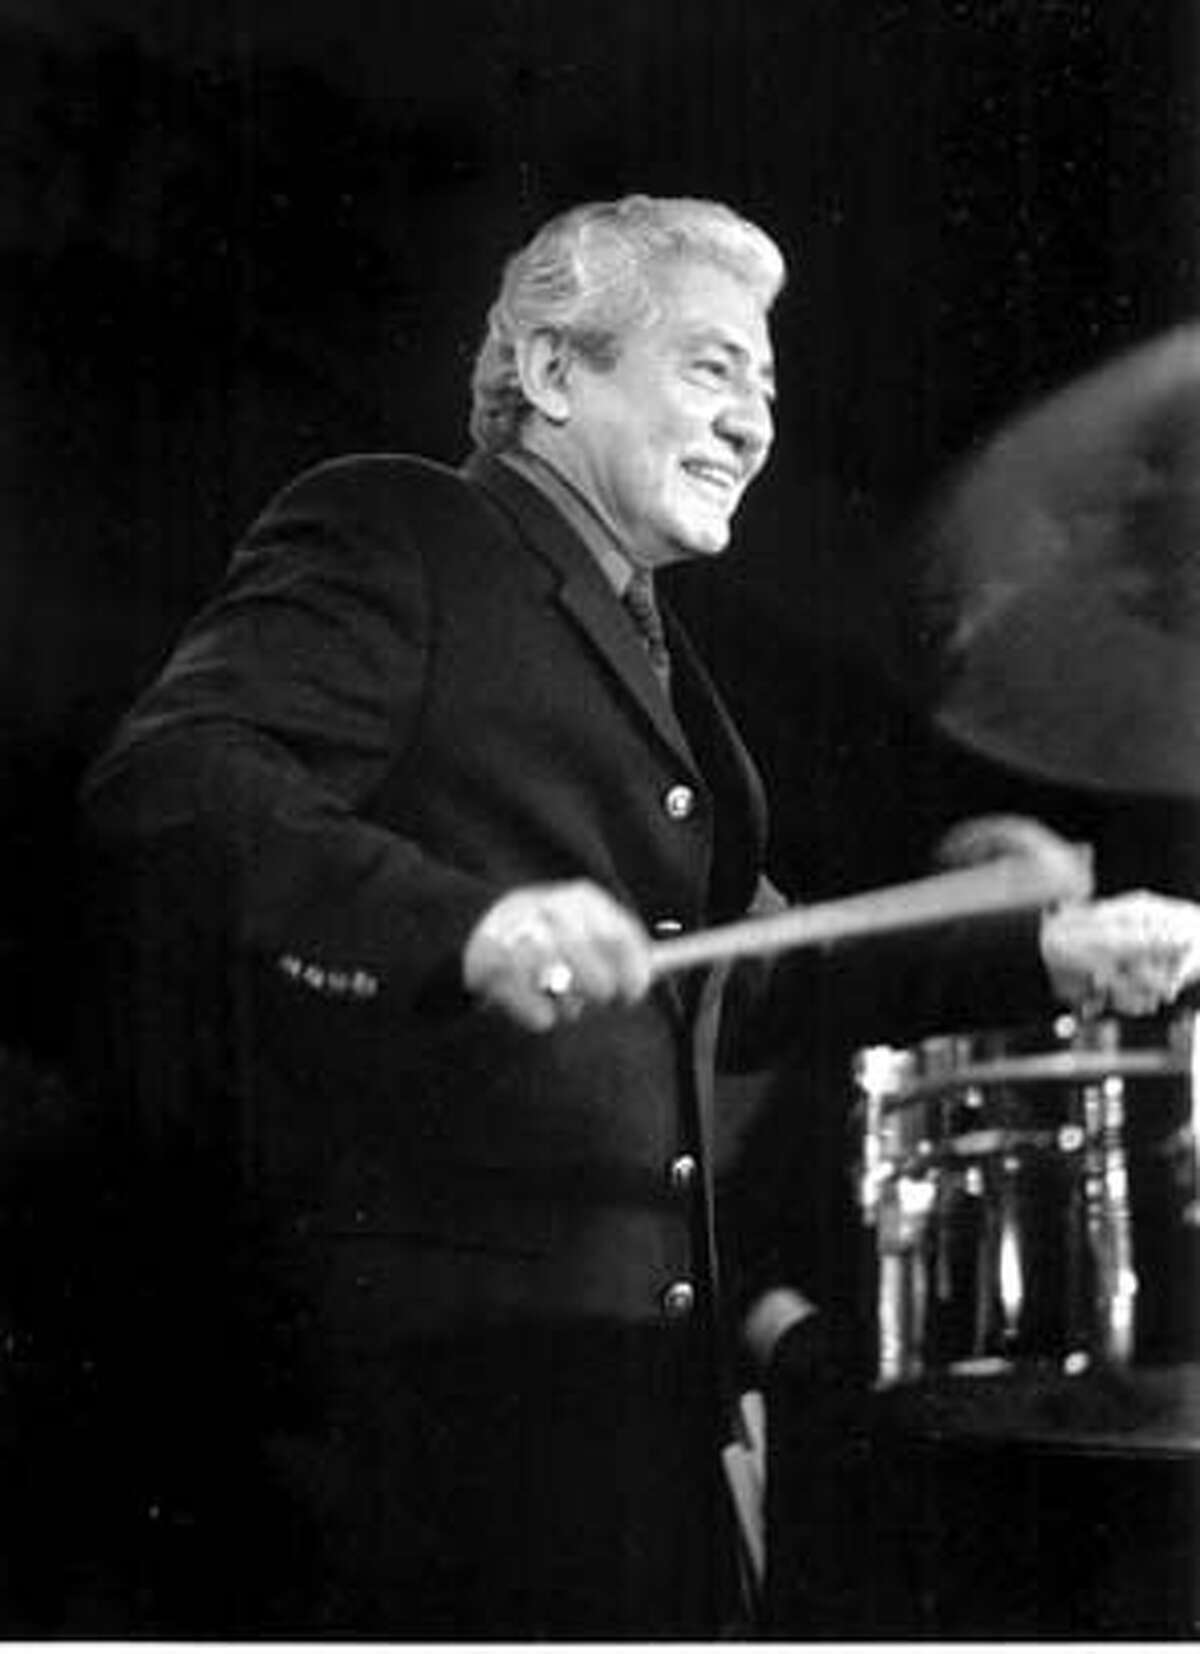 thufri15.JPG Pete Escovedo @ yoshi's 7/15-16 / HANDOUT Ran on: 07-15-2004 Pete Escovedo performs with his daughter Sheila E. and his orchestra at 8 and 10 tonight and Friday at Yoshis in Oakland. ALSO RAN 05-13-2007